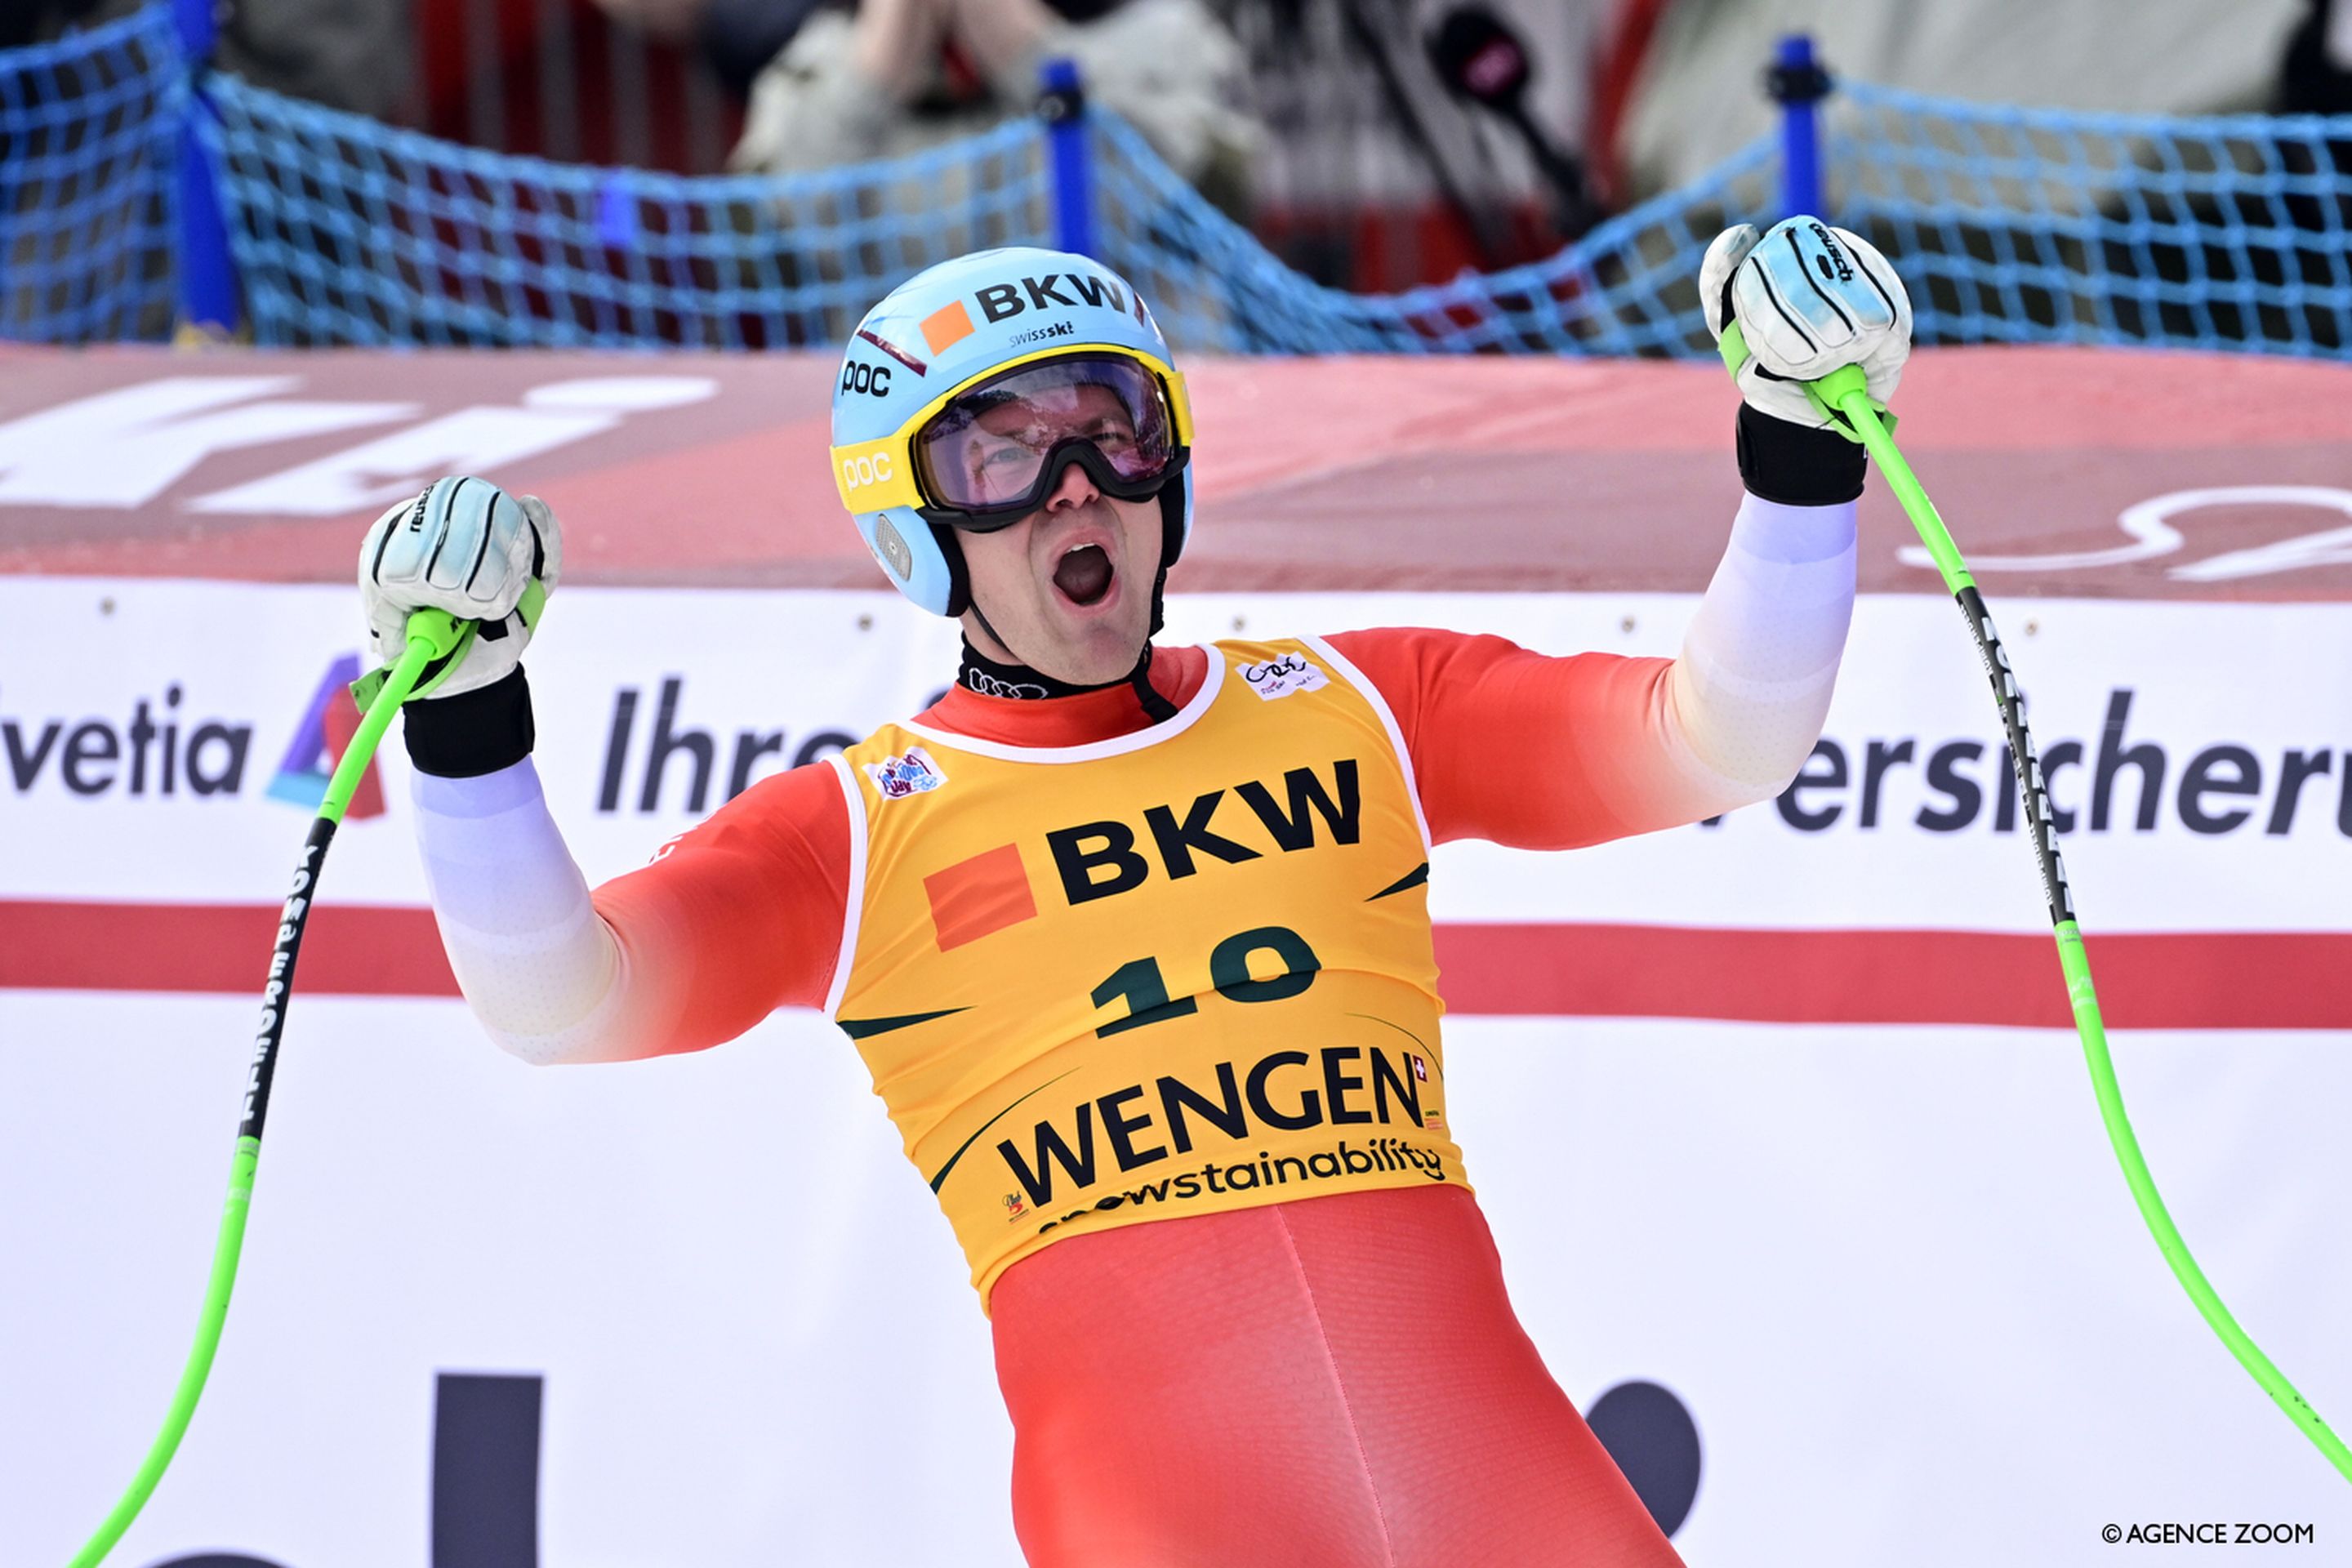 Rogentin recorded his first ever World Cup podium in Wengen